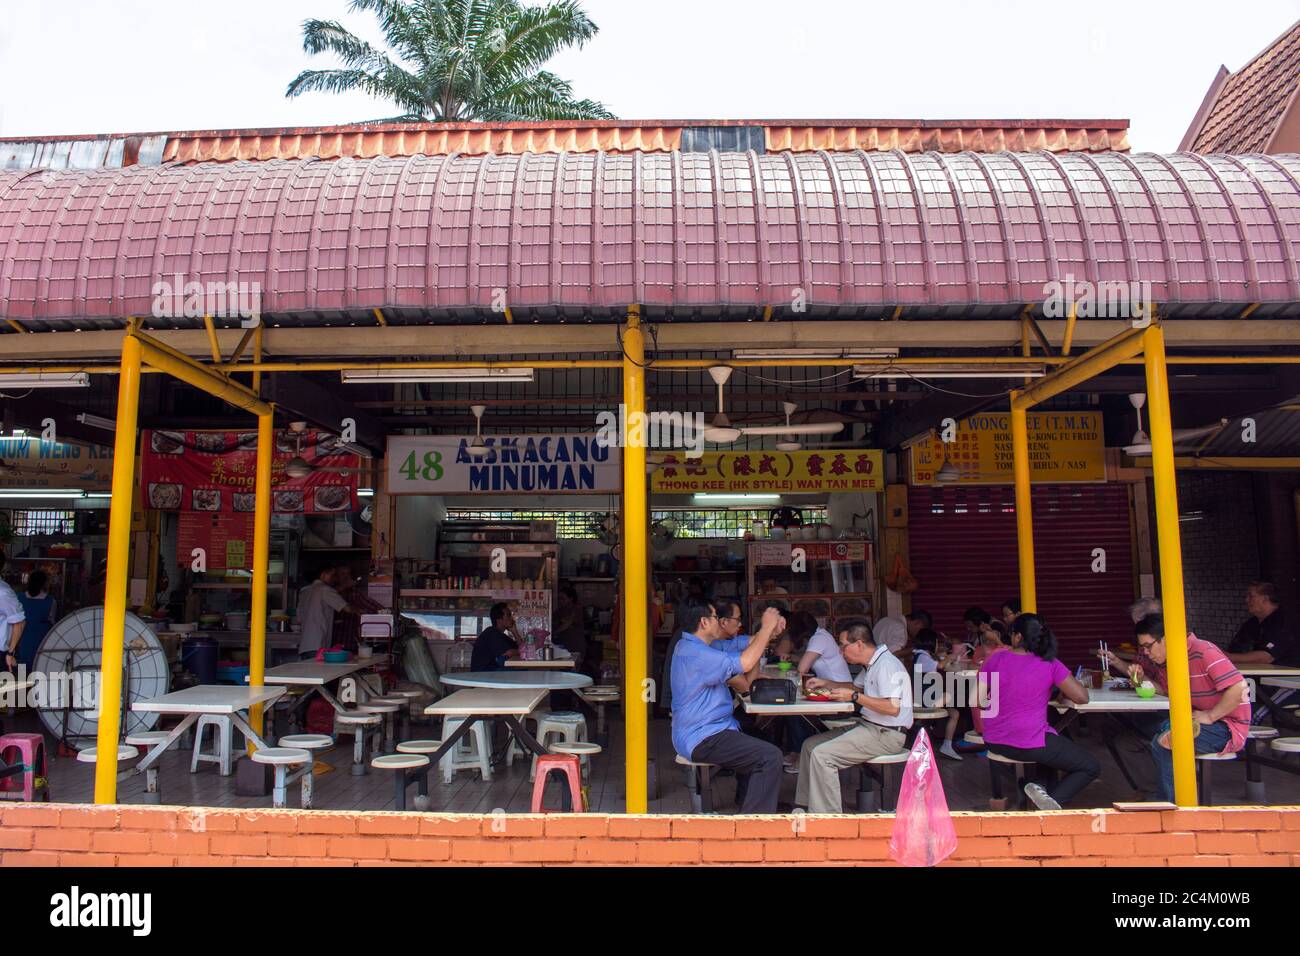 a scene of customer eating their lunch at food stalls Stock Photo